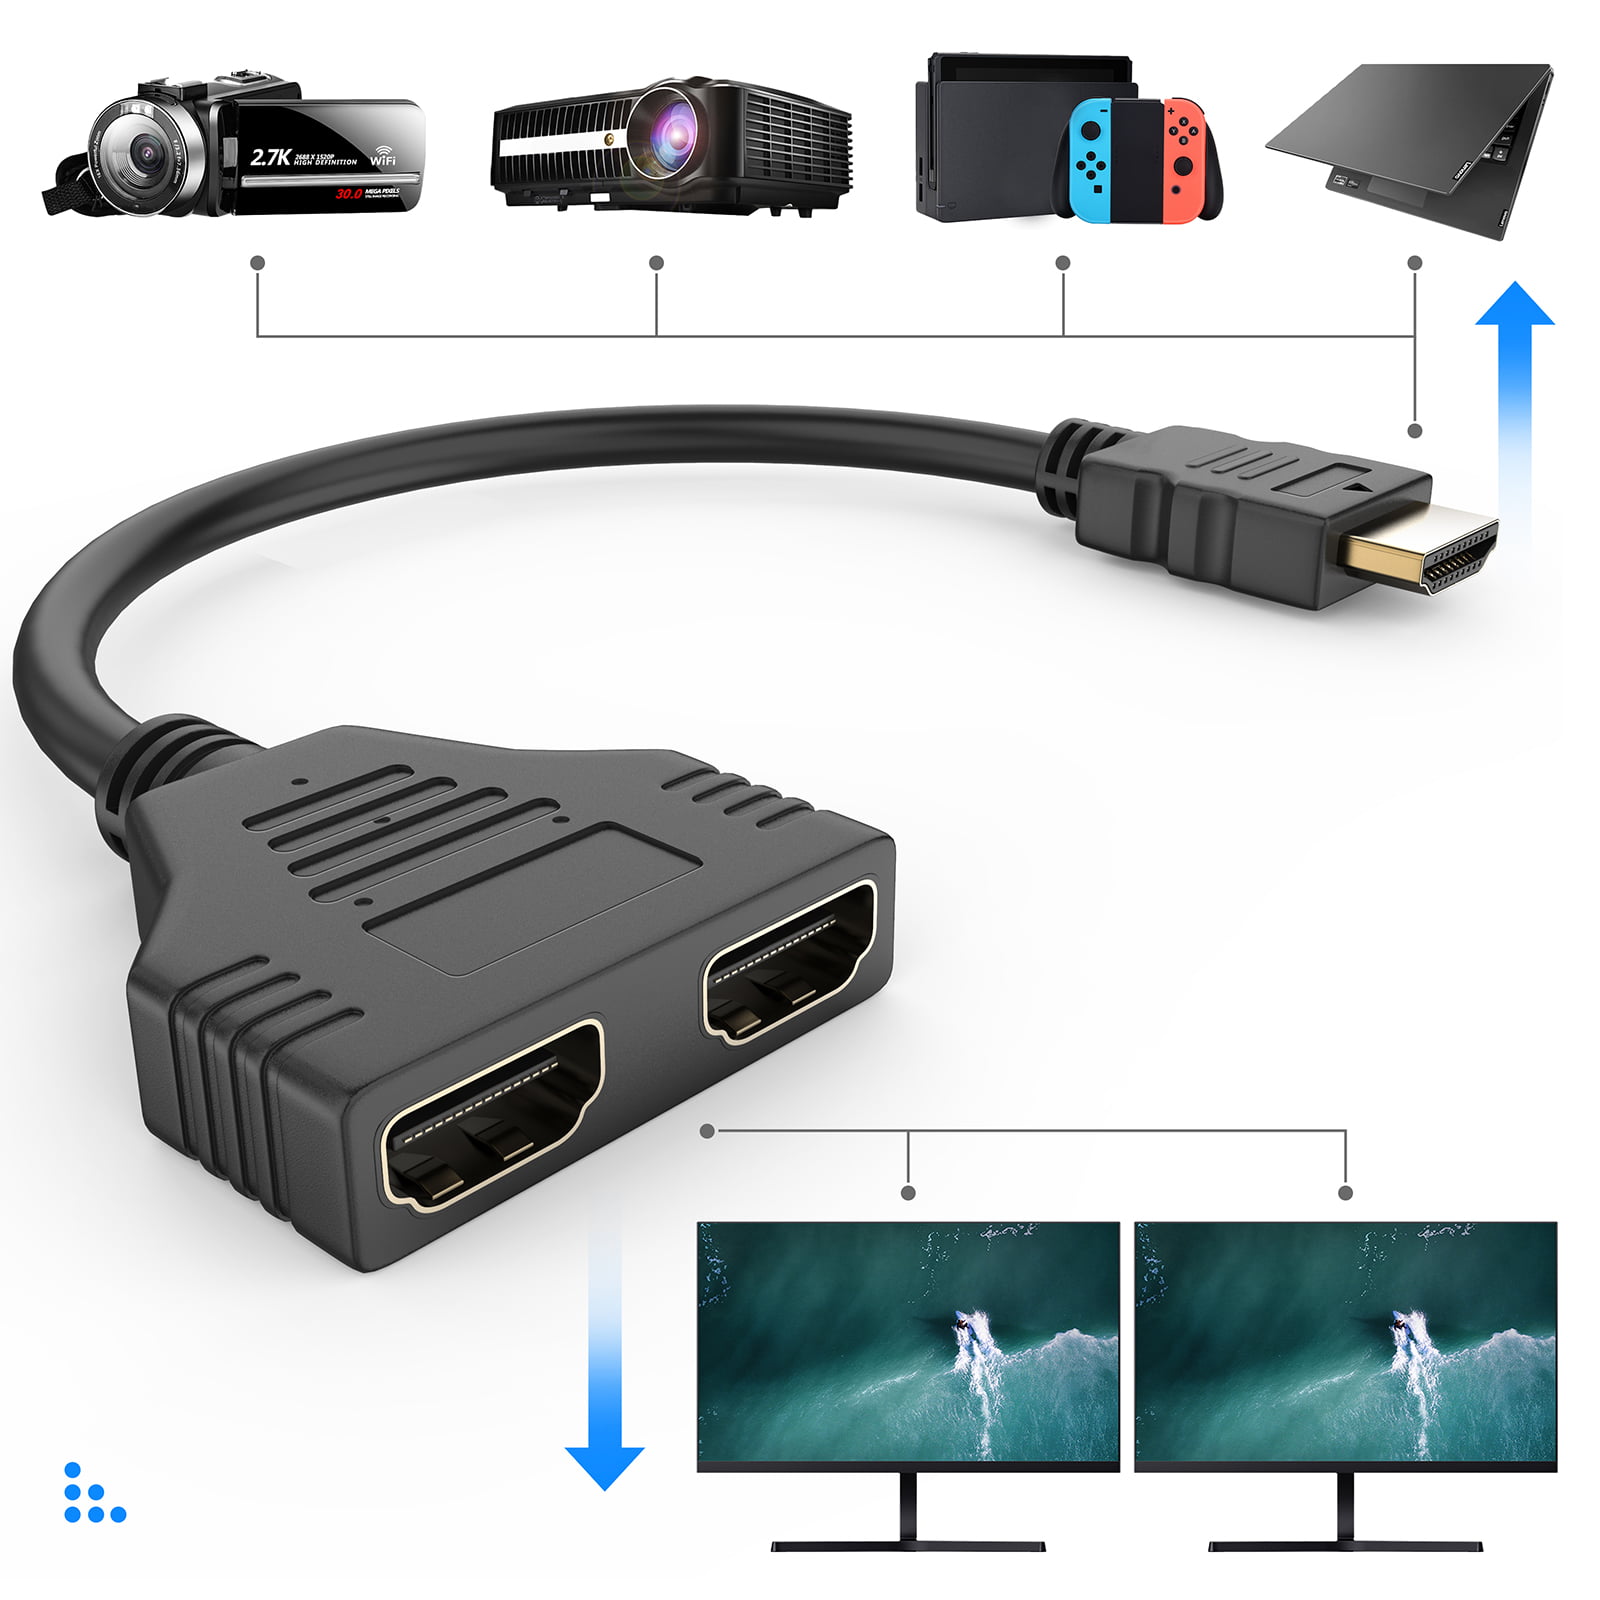 Universitet ressource Ynkelig 1080P HDMI Male to Dual HDMI Female 1 to 2 Way HDMI Splitter Adapter Cable  for DVD Players/PS3/HDTV - Walmart.com